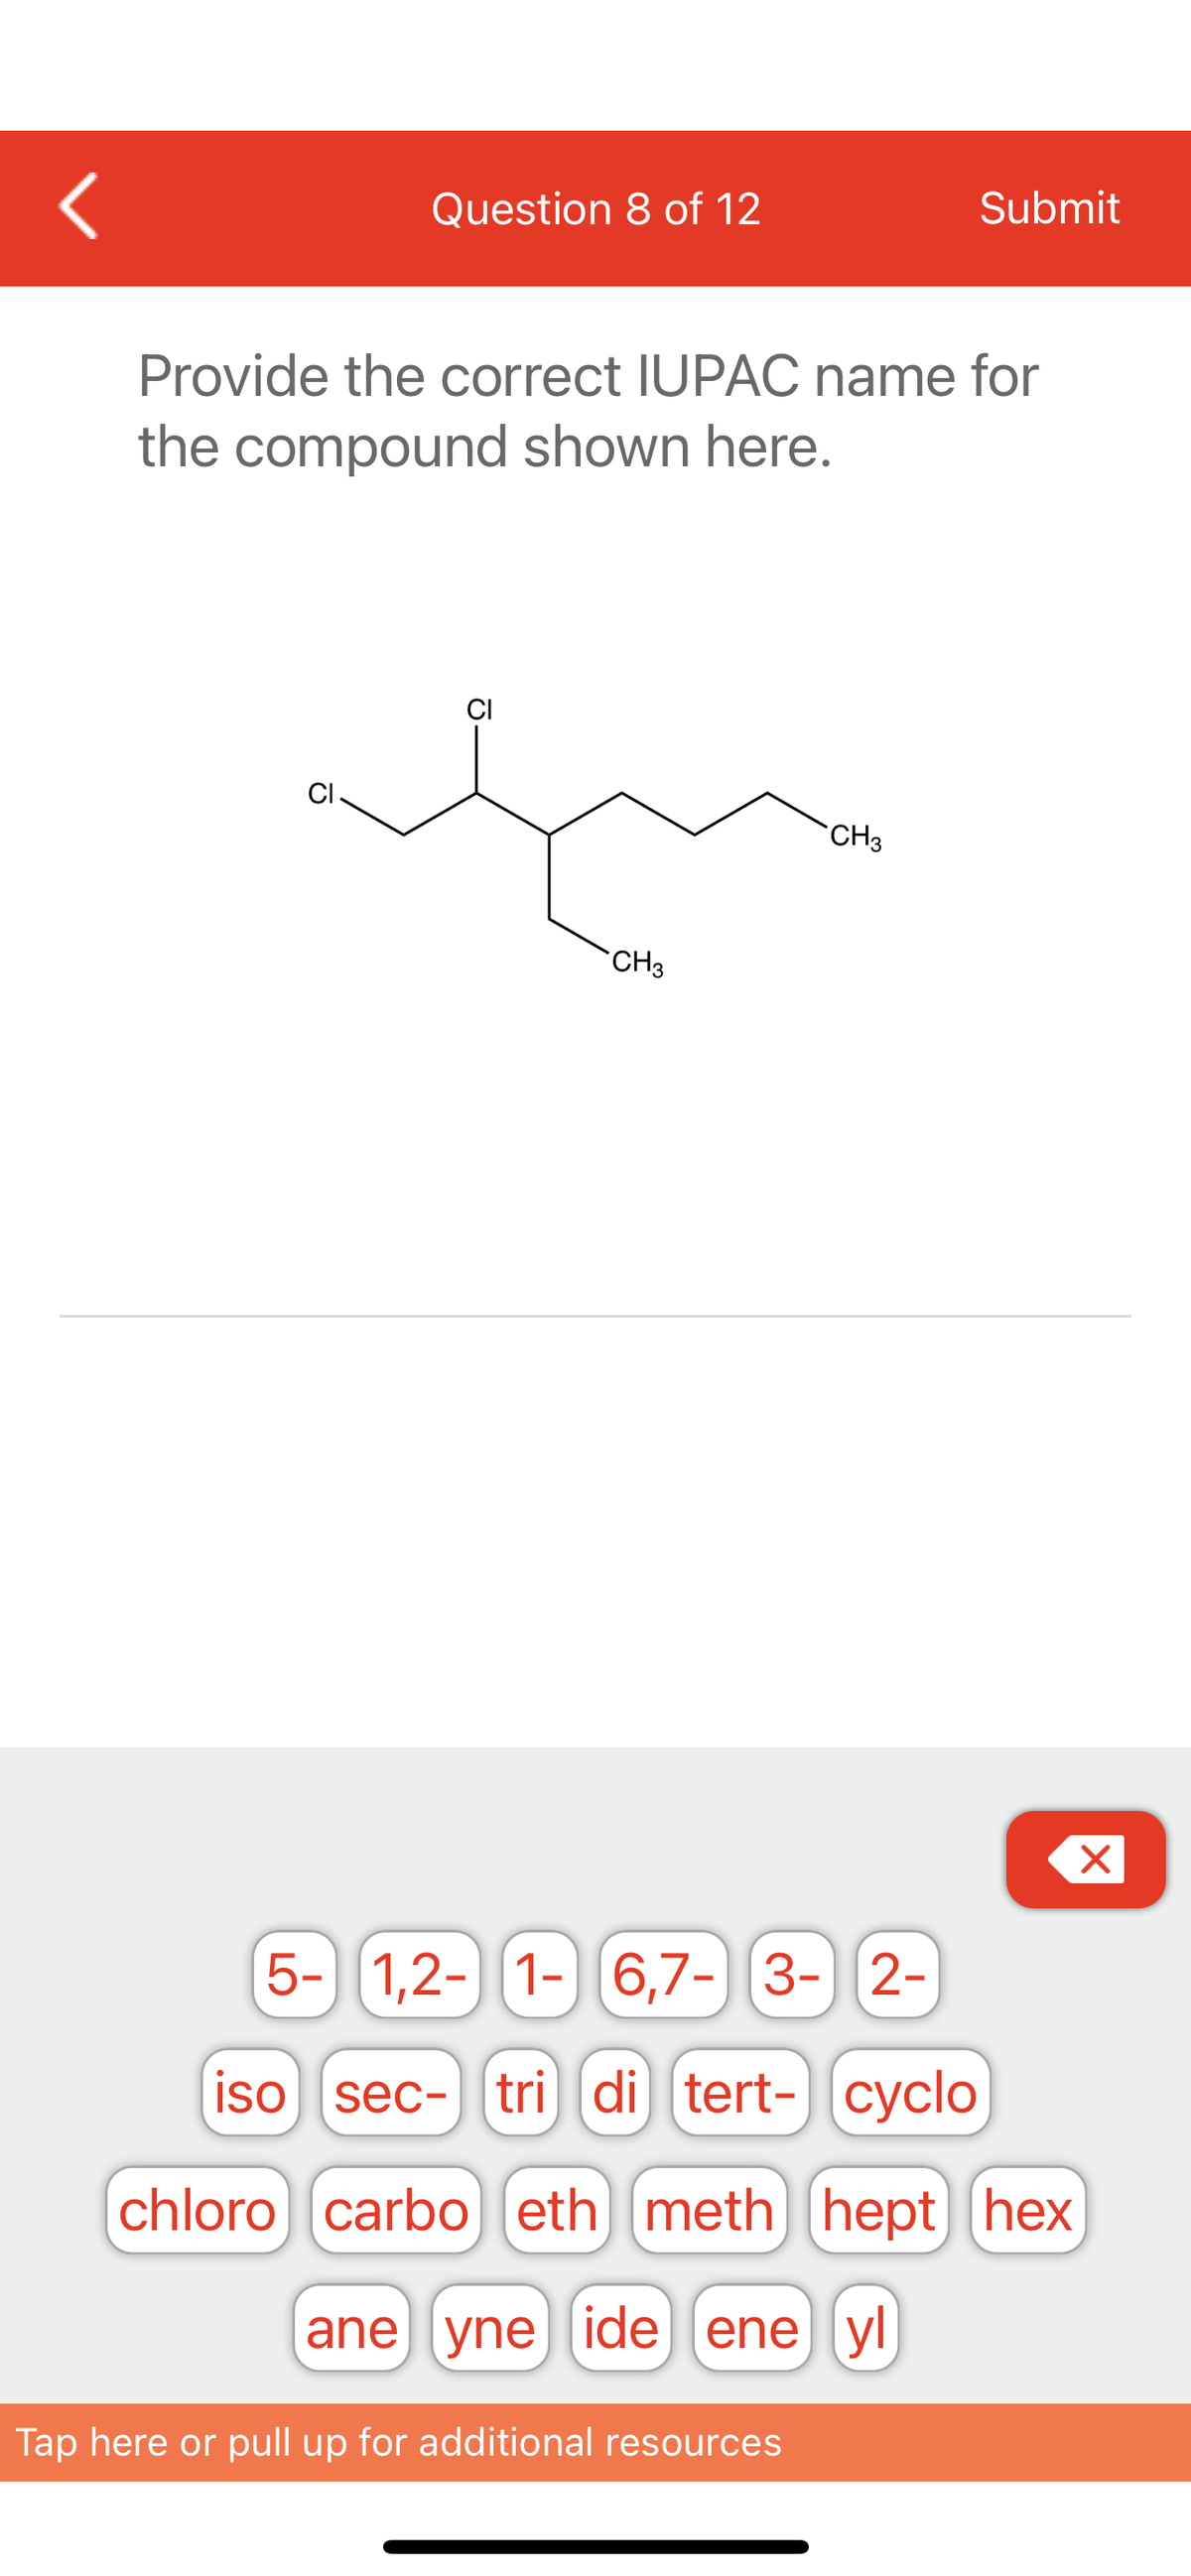 <
Question 8 of 12
Submit
Provide the correct IUPAC name for
the compound shown here.
CI
CH3
Ō
CH3
5- 1,2-
1,2- 1- 6,7-3-2-
iso sec- tri di tert- cyclo
chloro carbo eth meth] [hept hex
ane yne ide ene yl
Tap here or pull up for additional resources
X